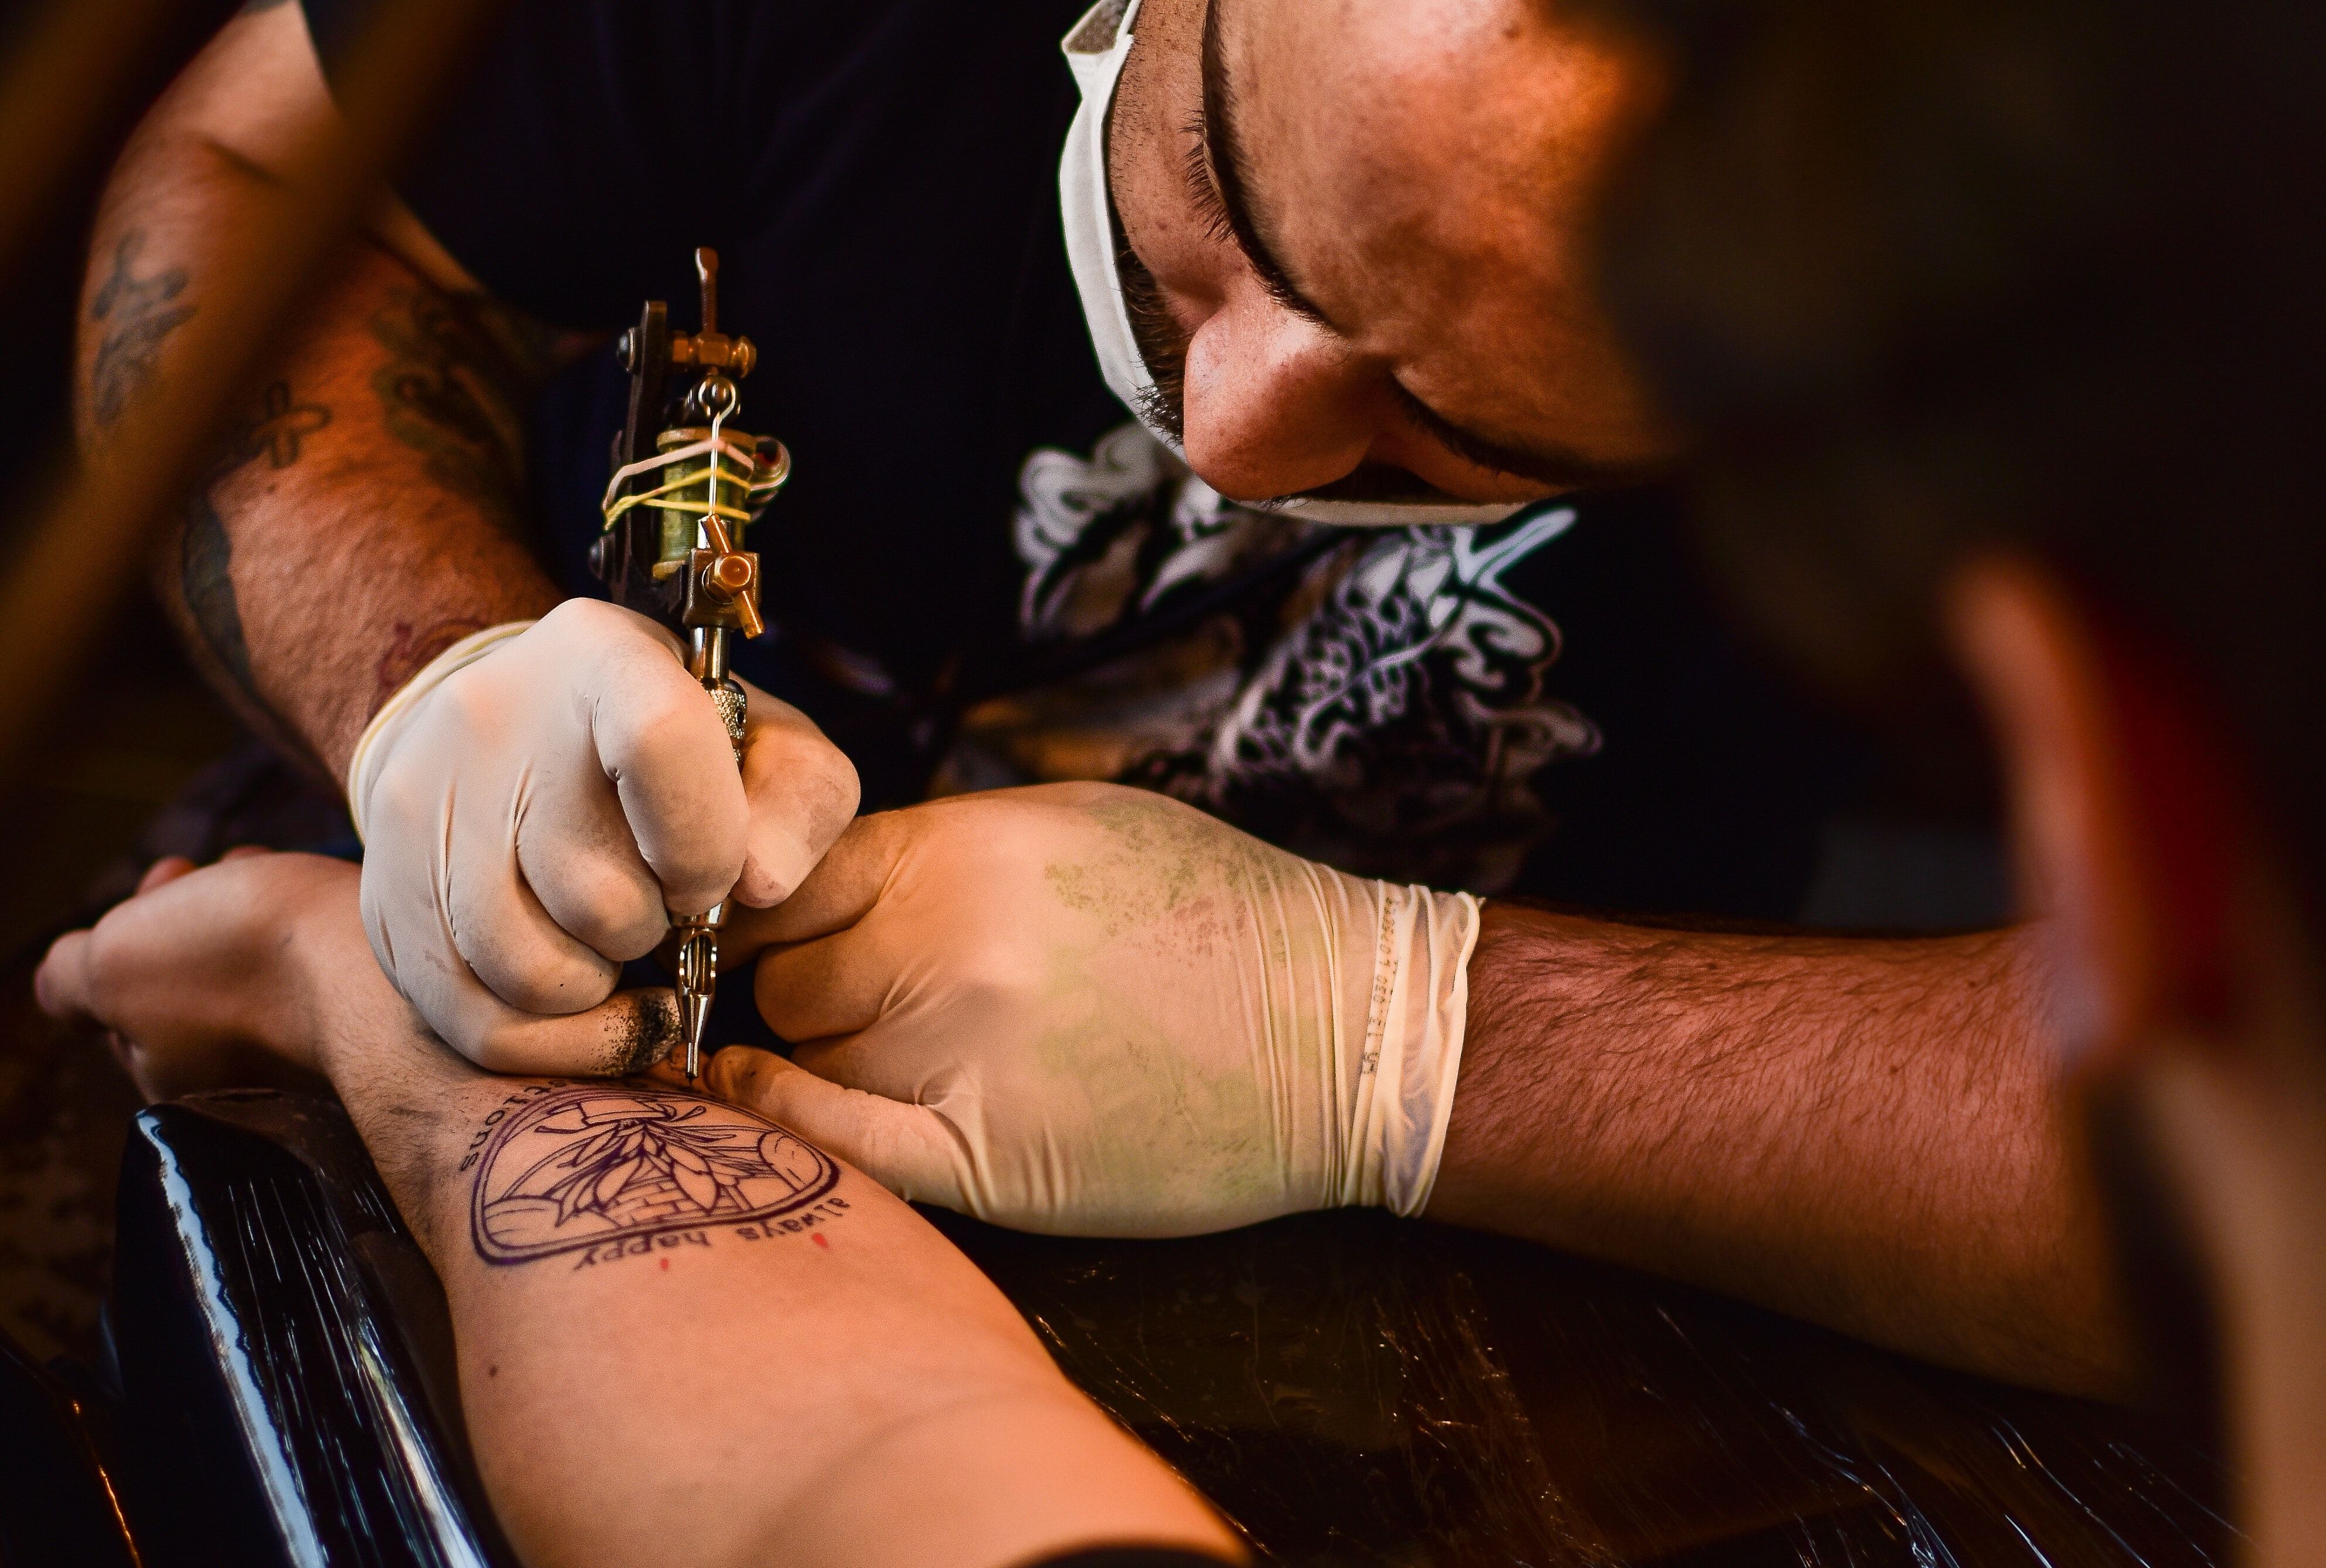 How many hours before a tattoo can you drink? - Quora